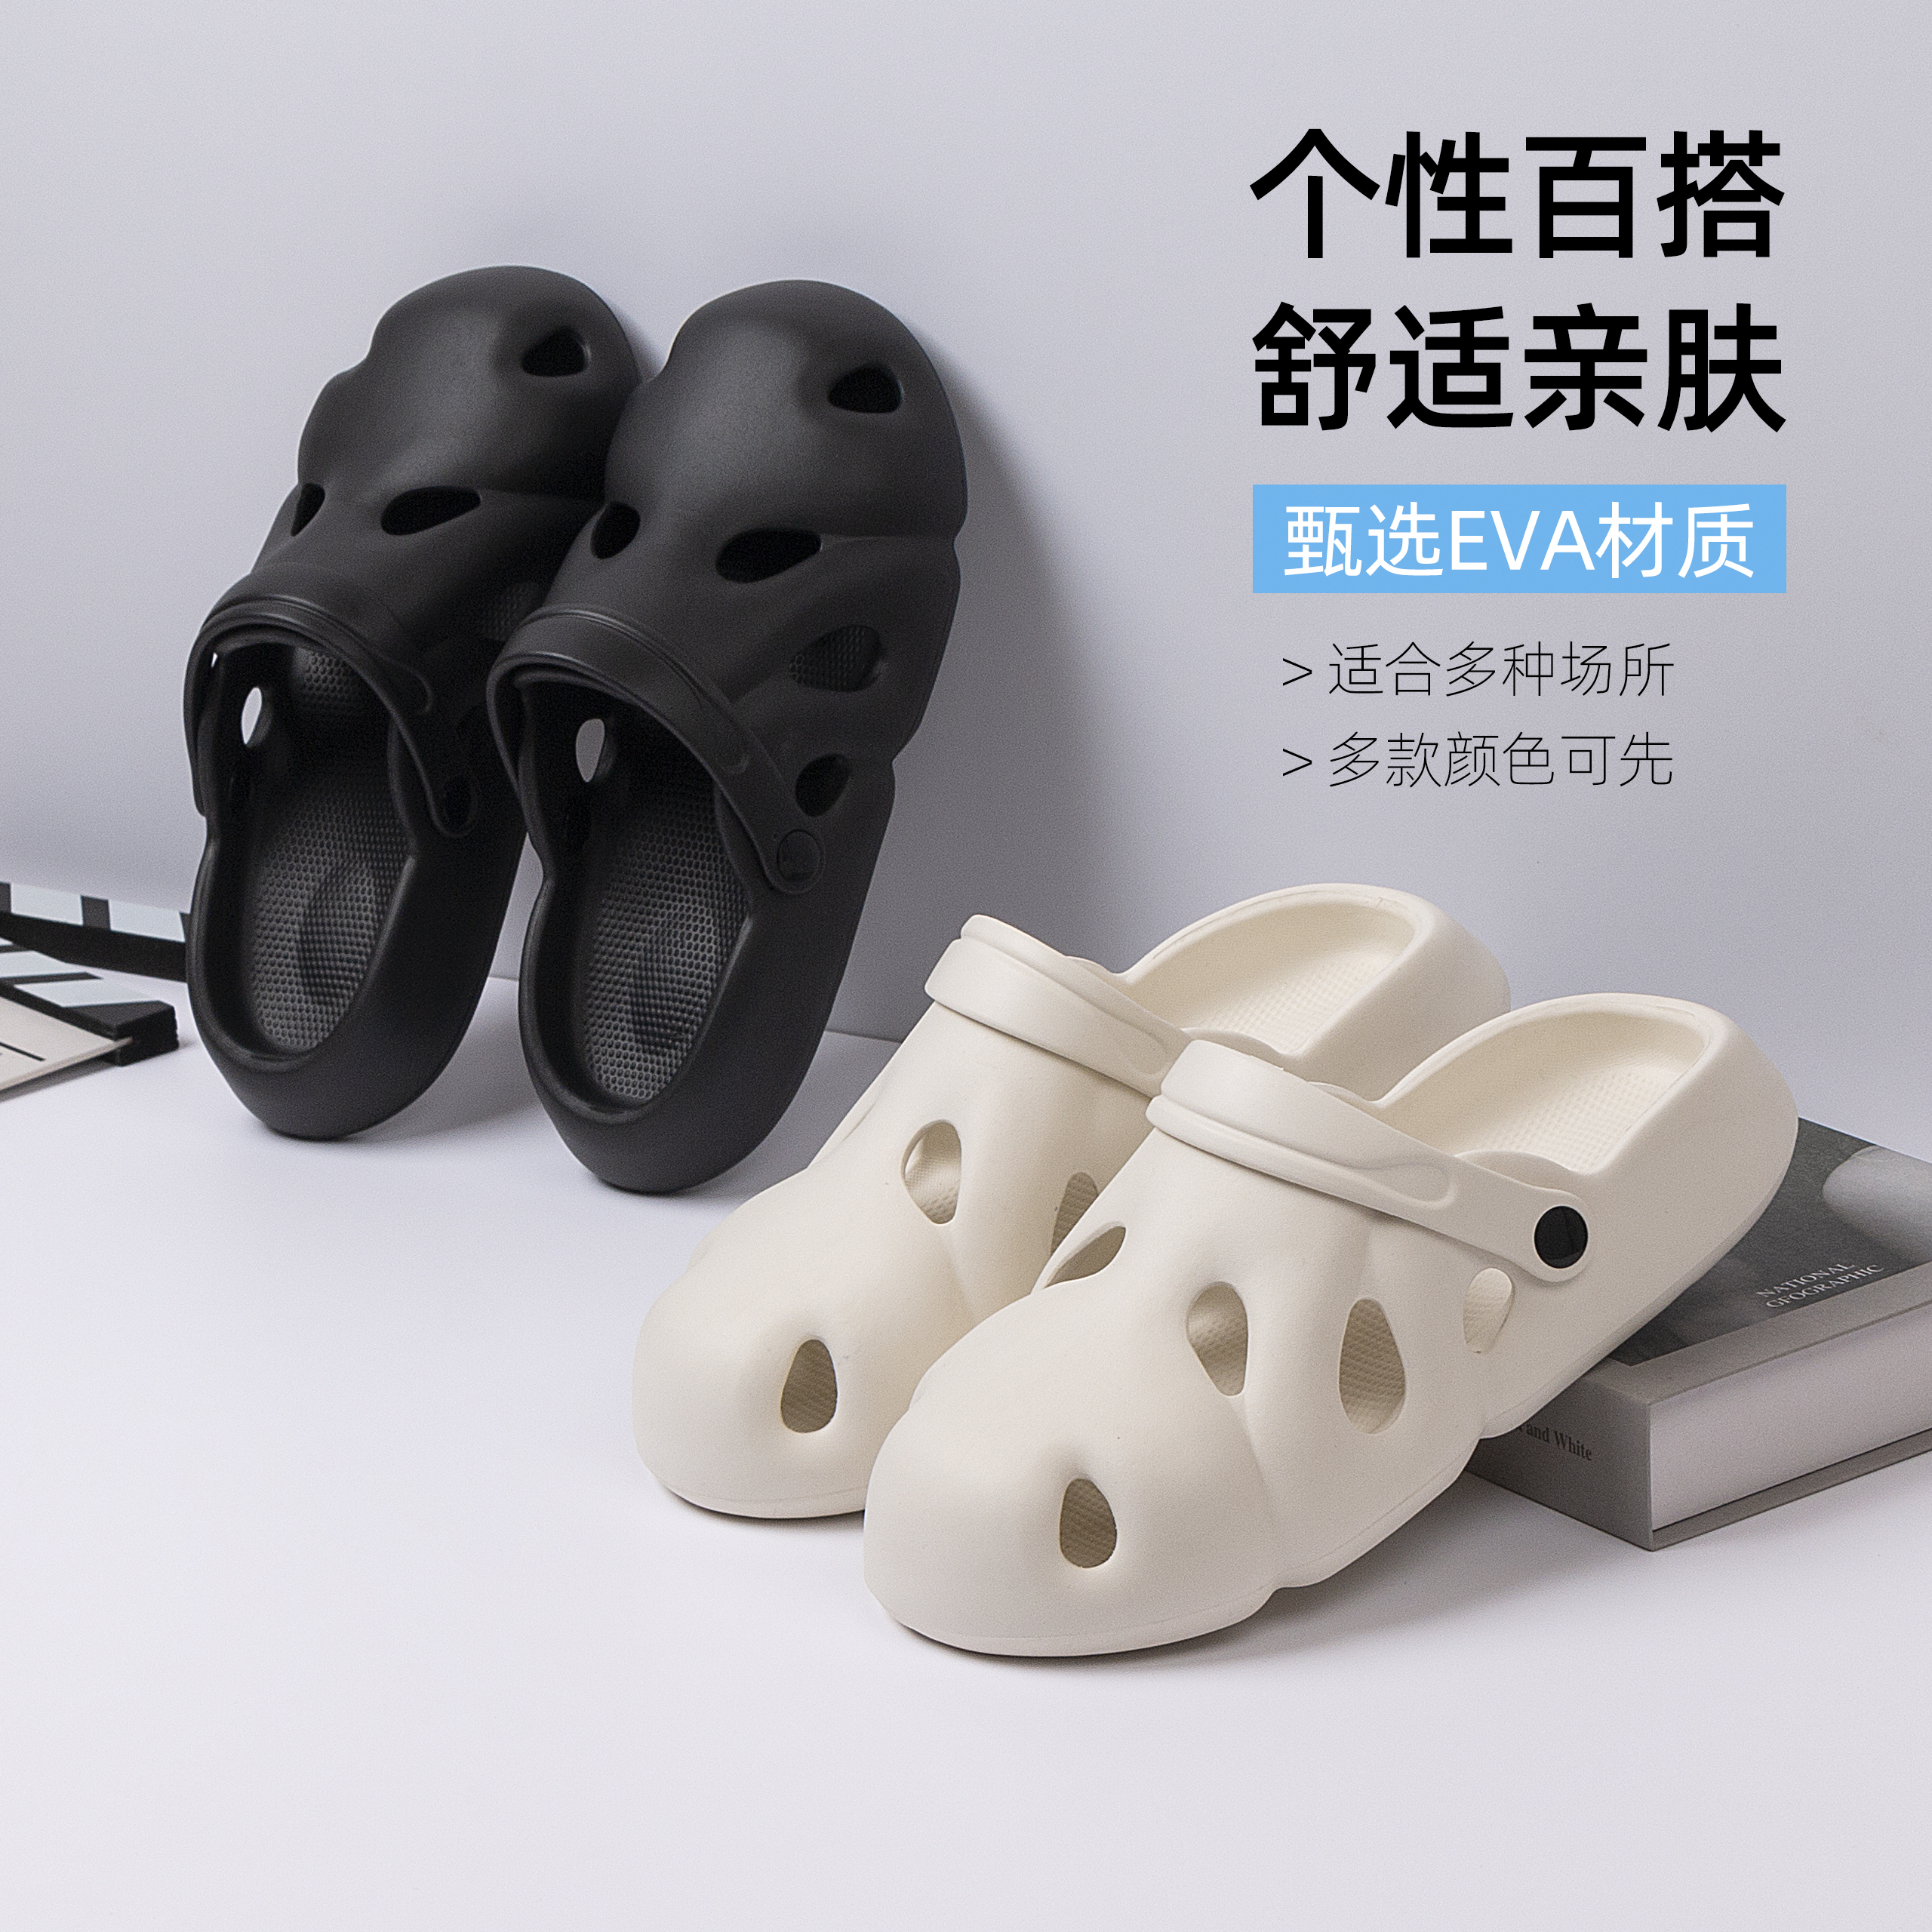 Comfortable, Soft and Stylish Garden Shoes for Man  QL9303 Featured Image